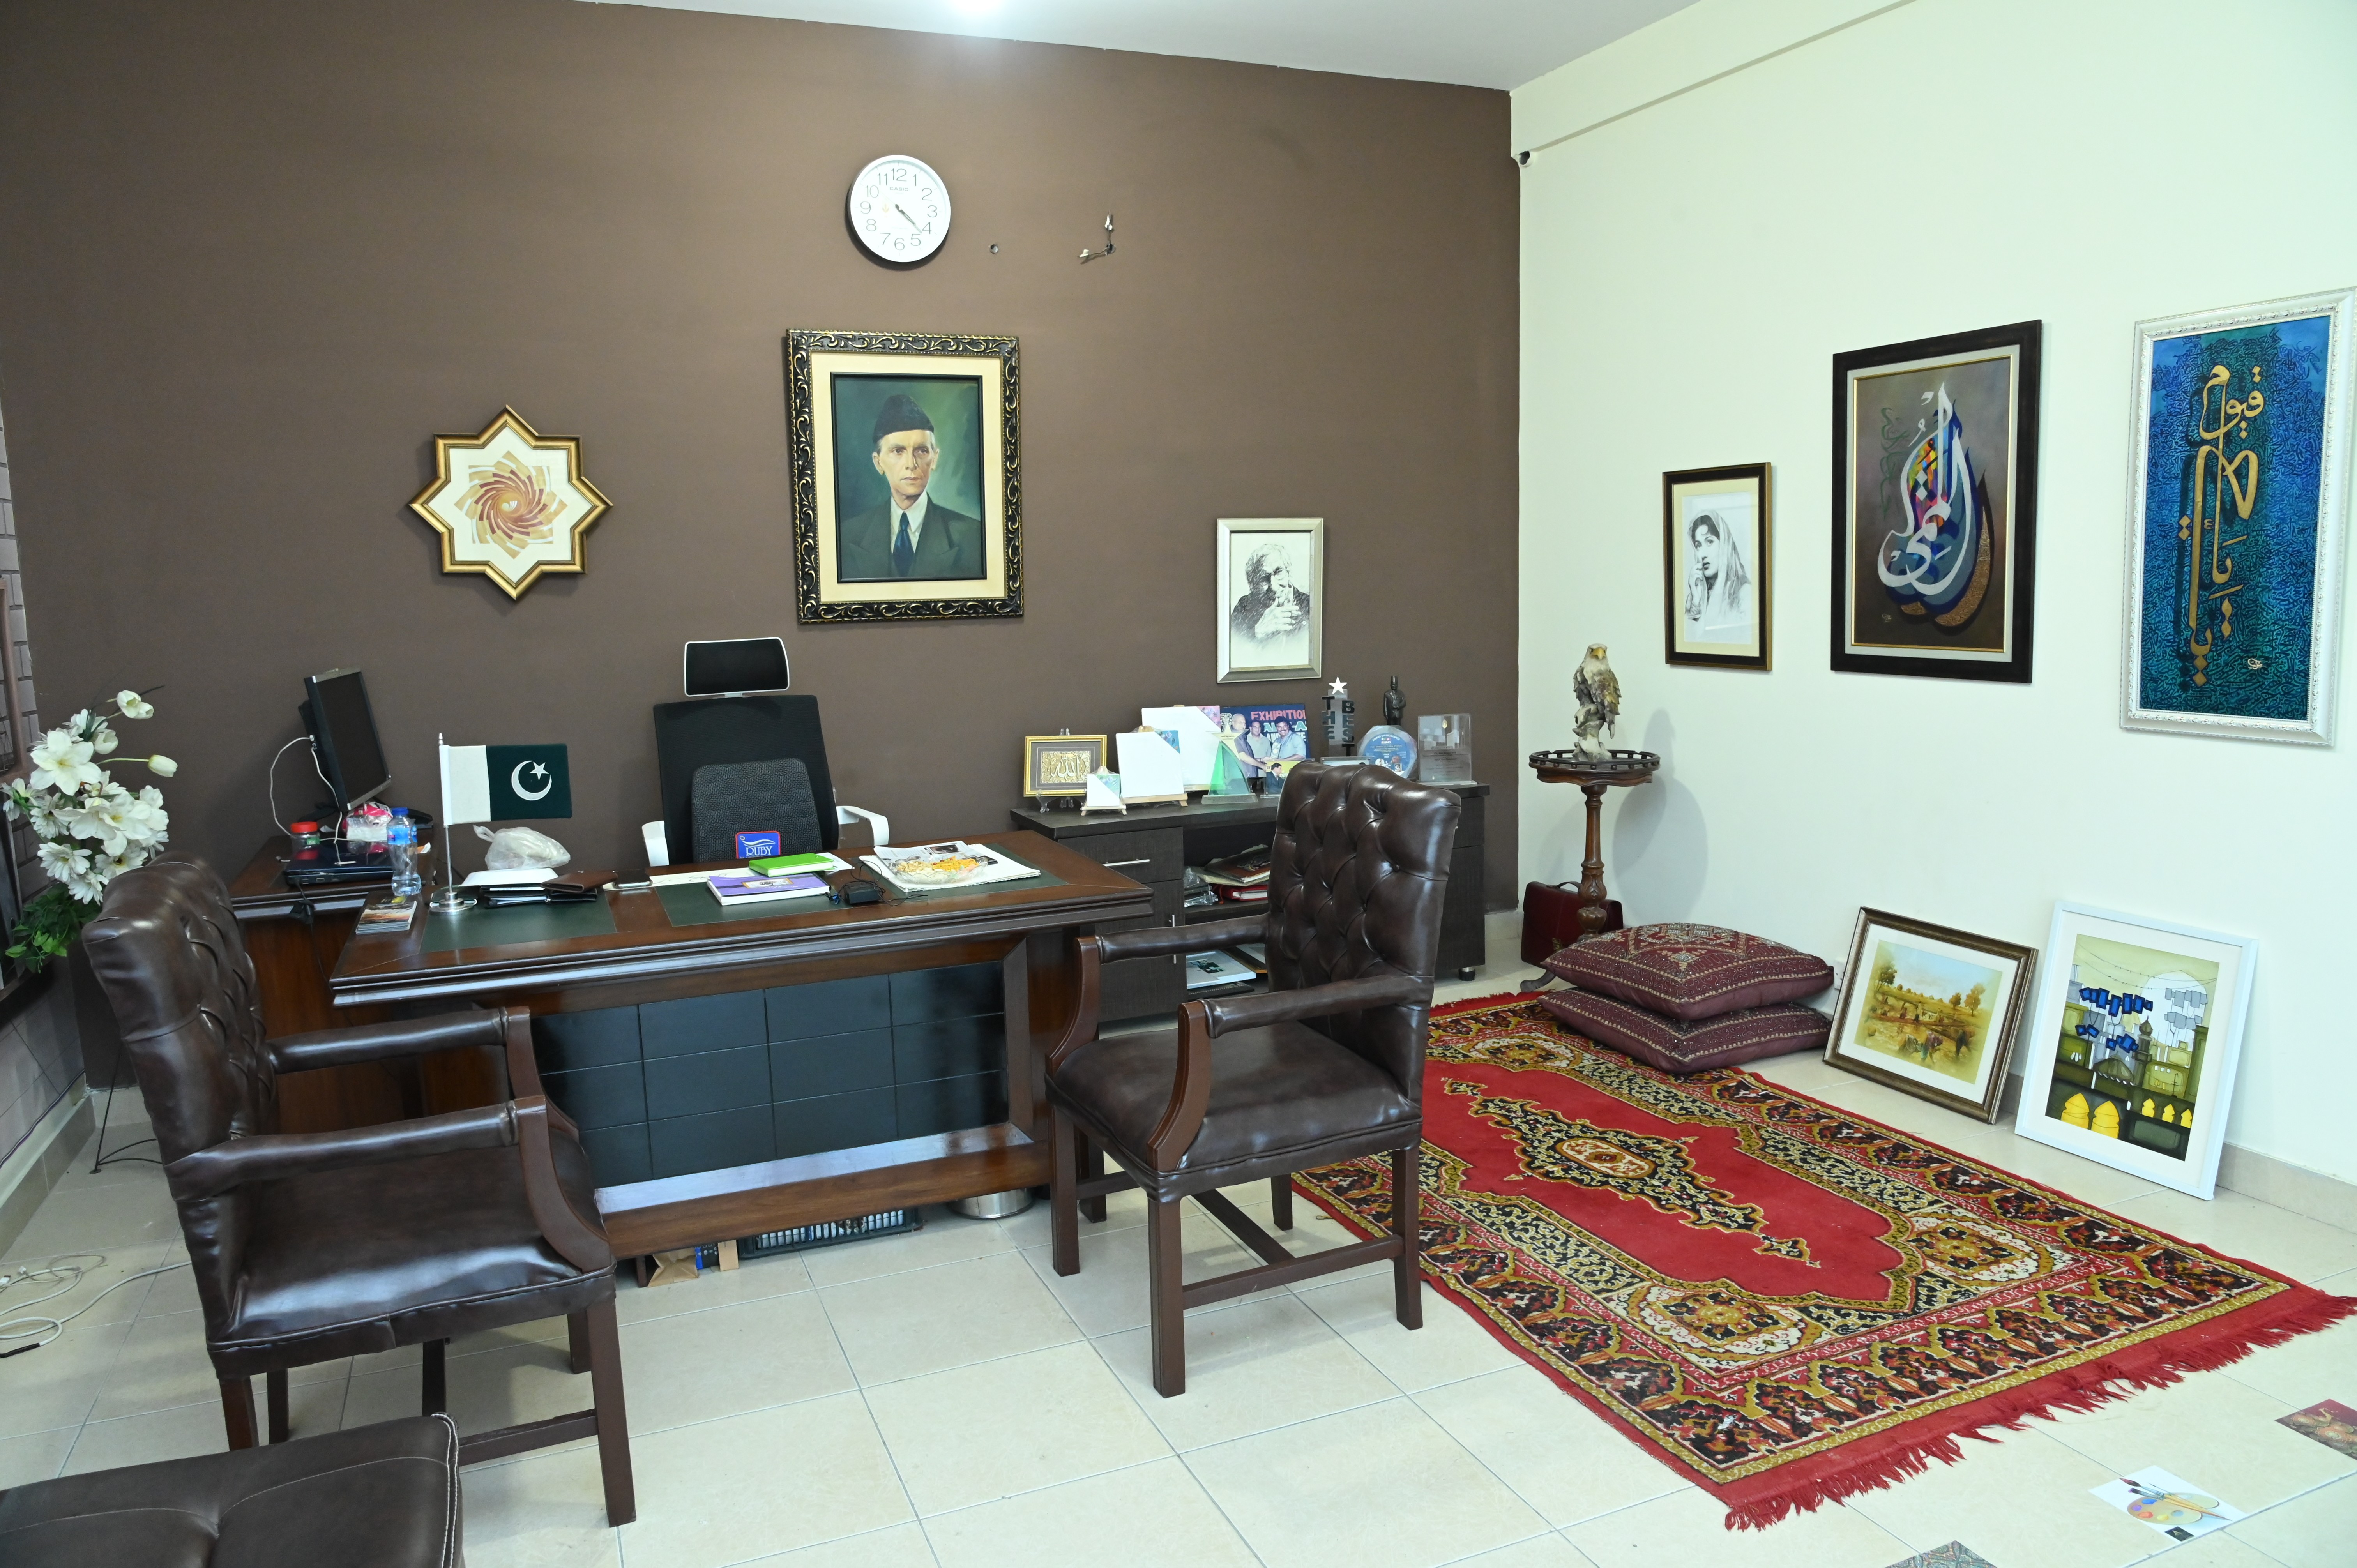 The Office of Tariq Mehmood, the Founder and the Curator of an artage artgallery